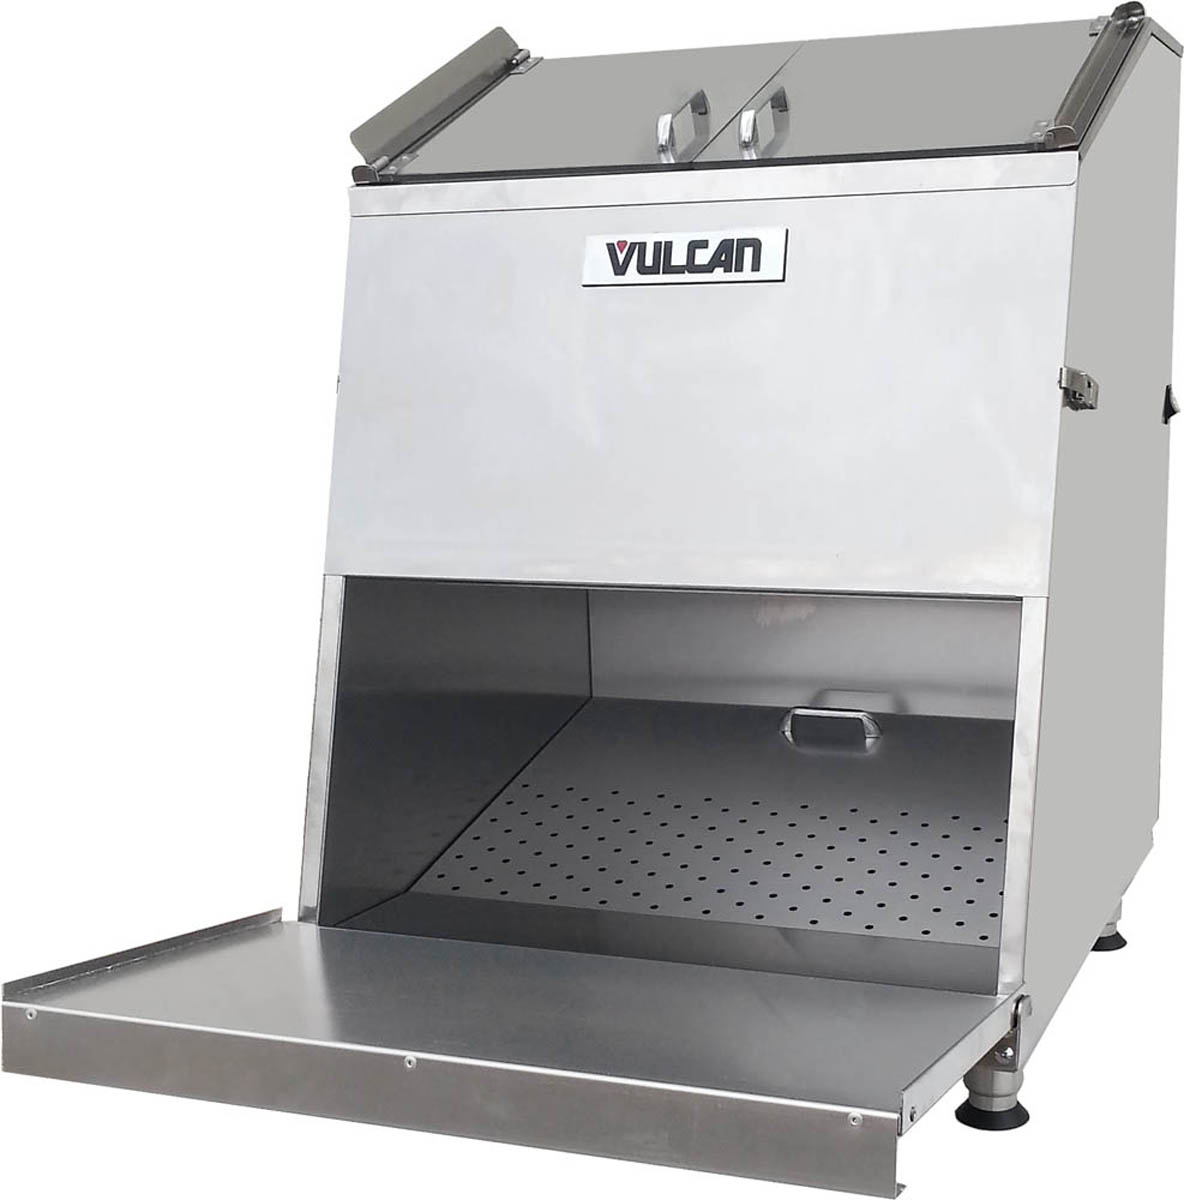 Vulcan VCW46 46 Gallon First-In First-Out Chip Warmer, Top Load Style - 1500W